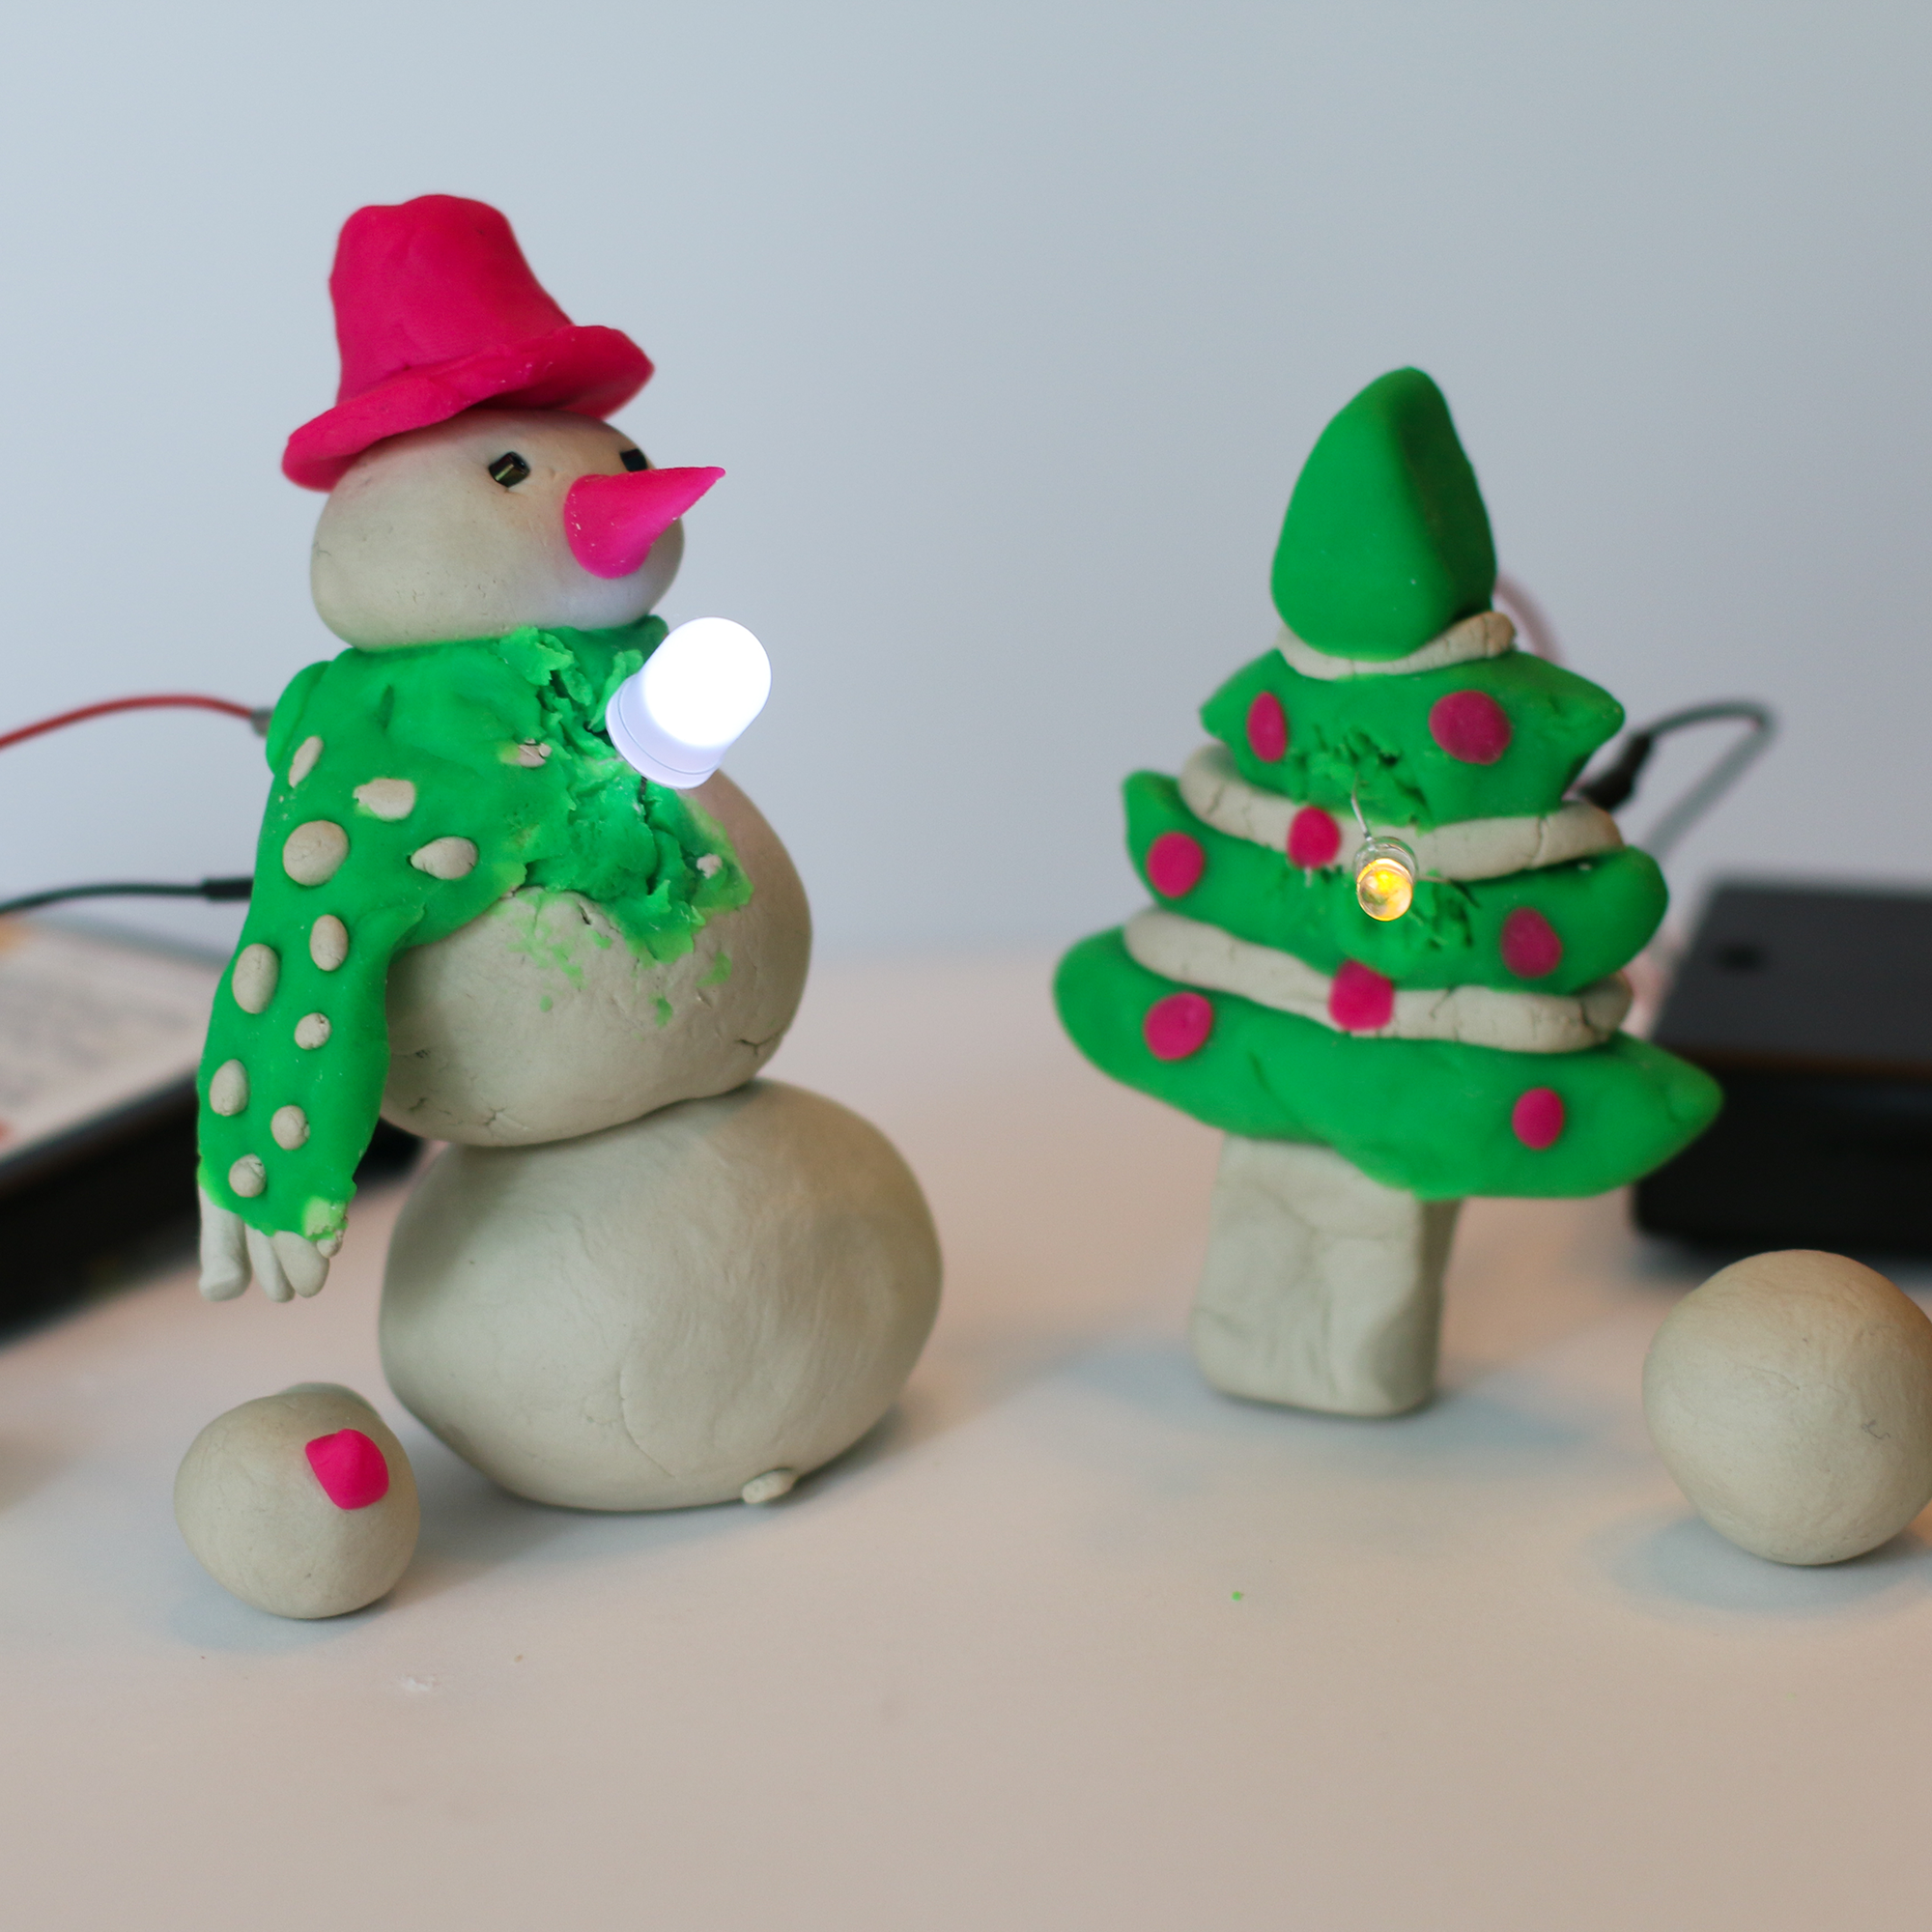 Snowman and Tree Electric Playdough Example Holiday STEM Activities - STEM Calendar For Educators: Month By Month STEM Projects